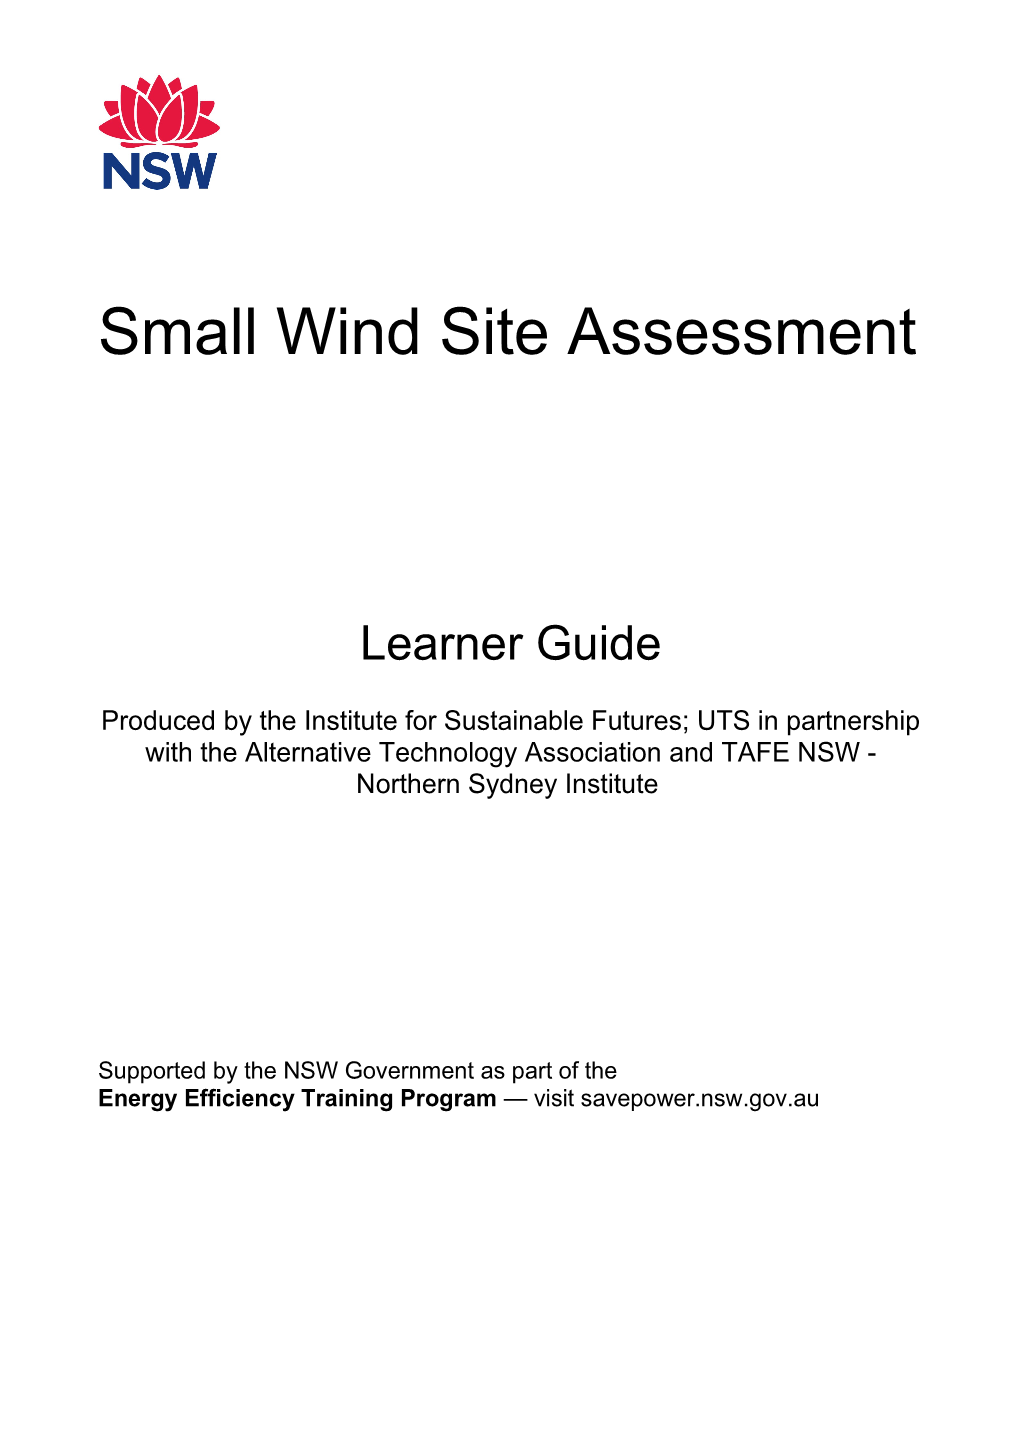 Small Wind Site Assessment